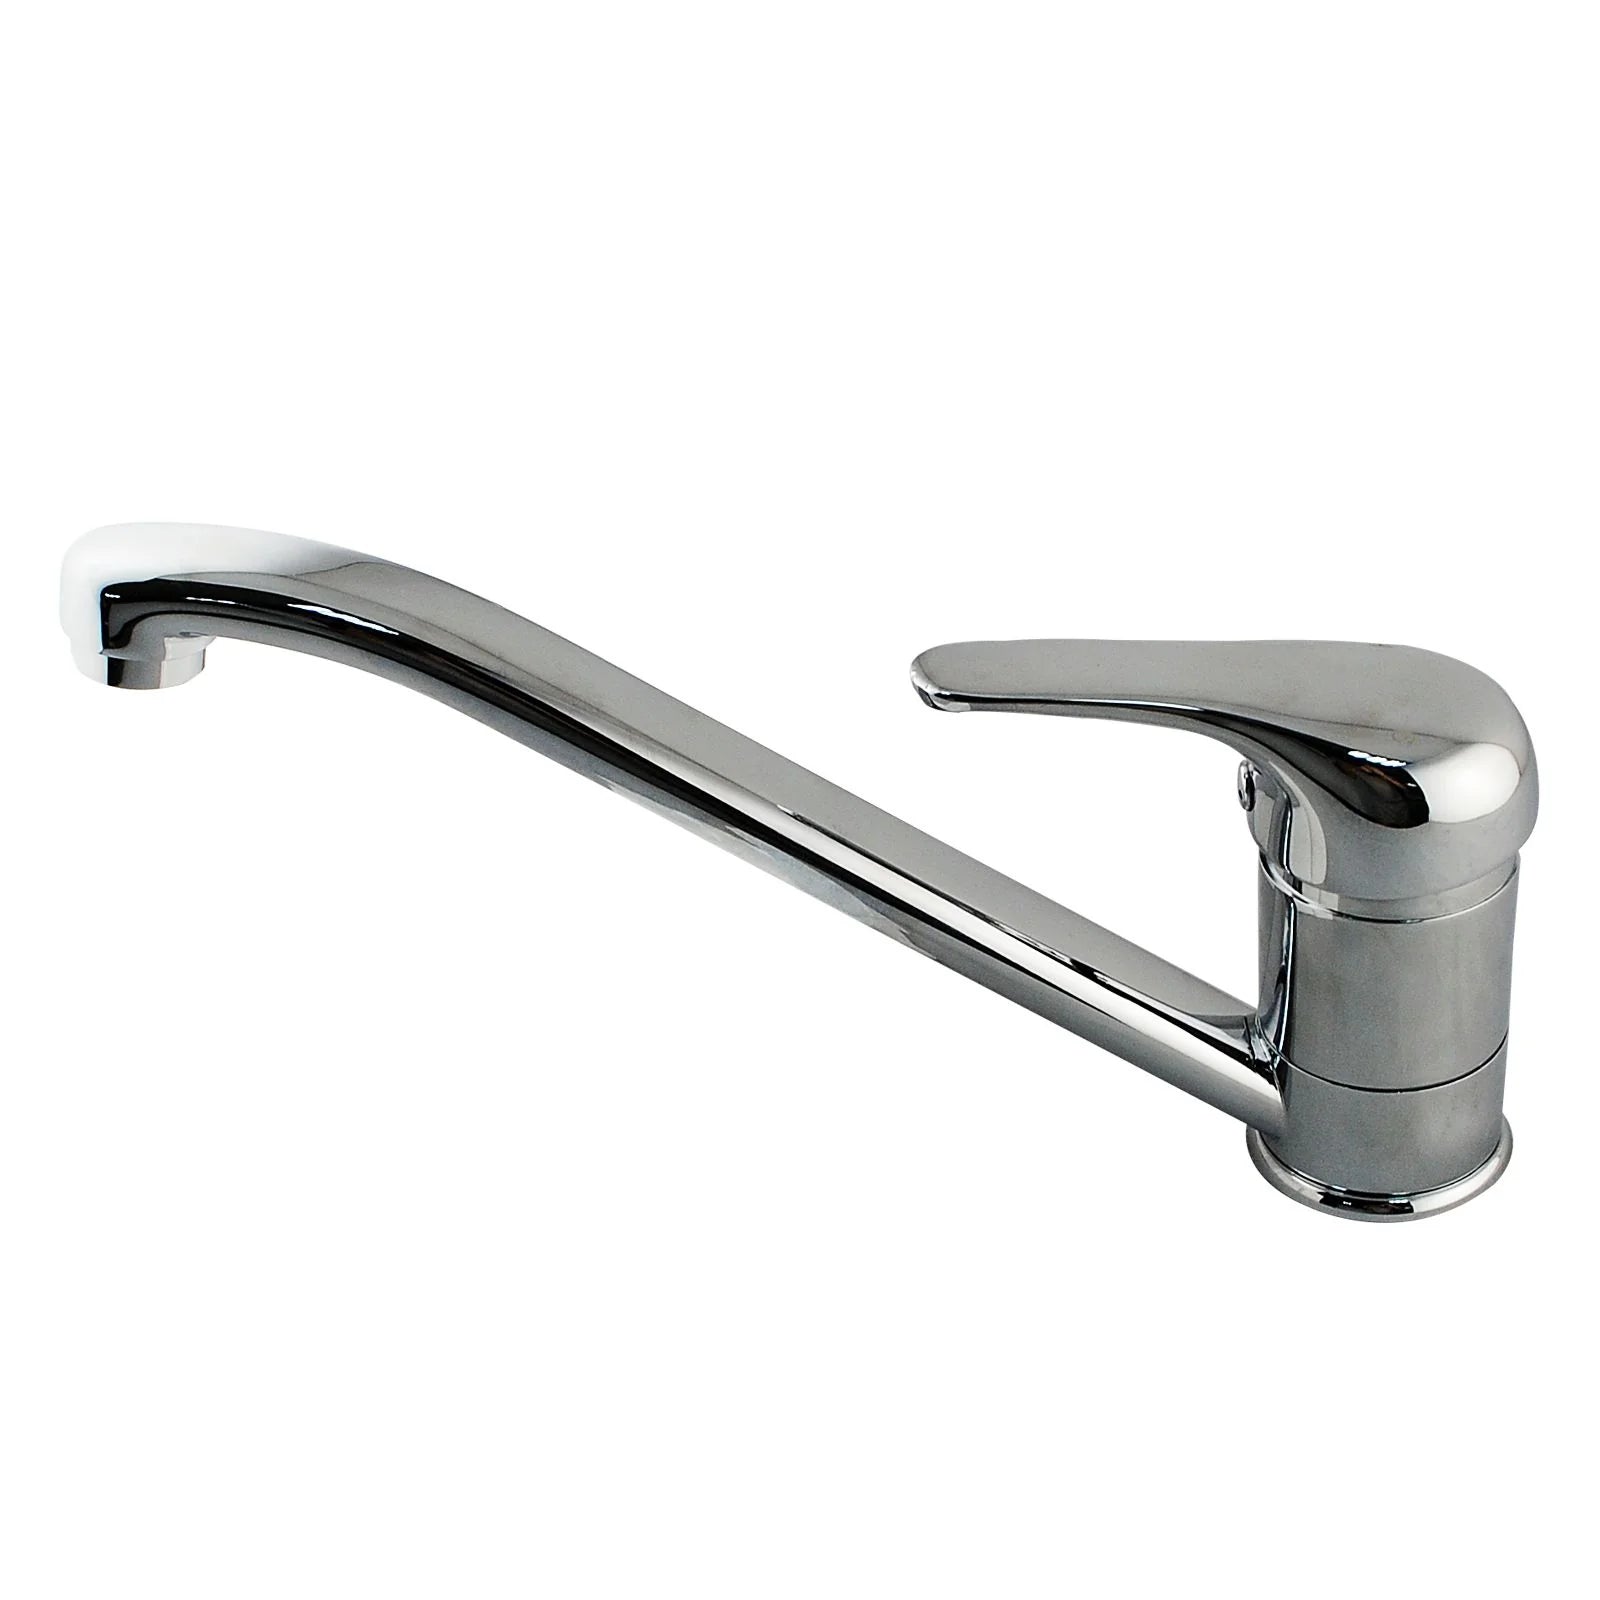 Standard kitchen mixer tap: Classic design for everyday use-CH1003.KM